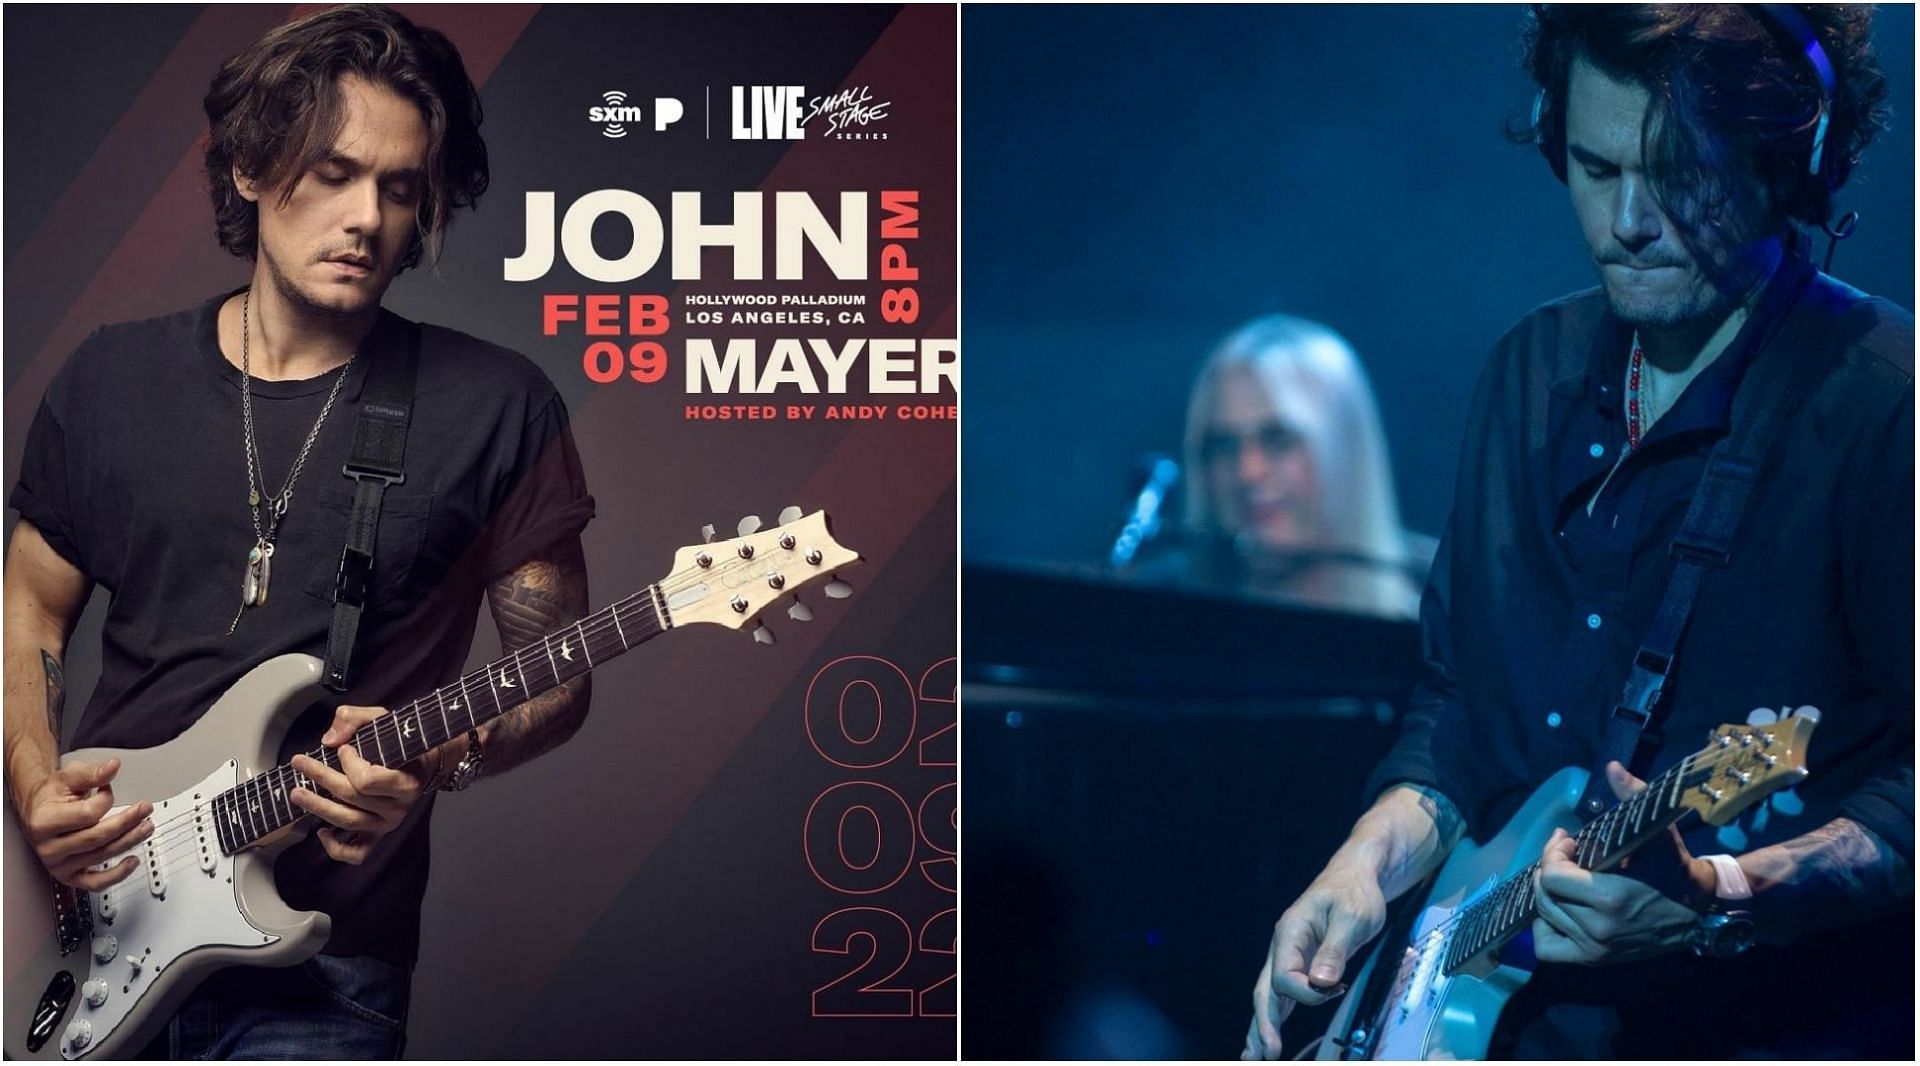 On Wednesday, John Mayer will kick off the Super Bowl weekend in Los Angeles with a Small Stage Series concert at the Hollywood Palladium (Images via Instagram @johnmayer)